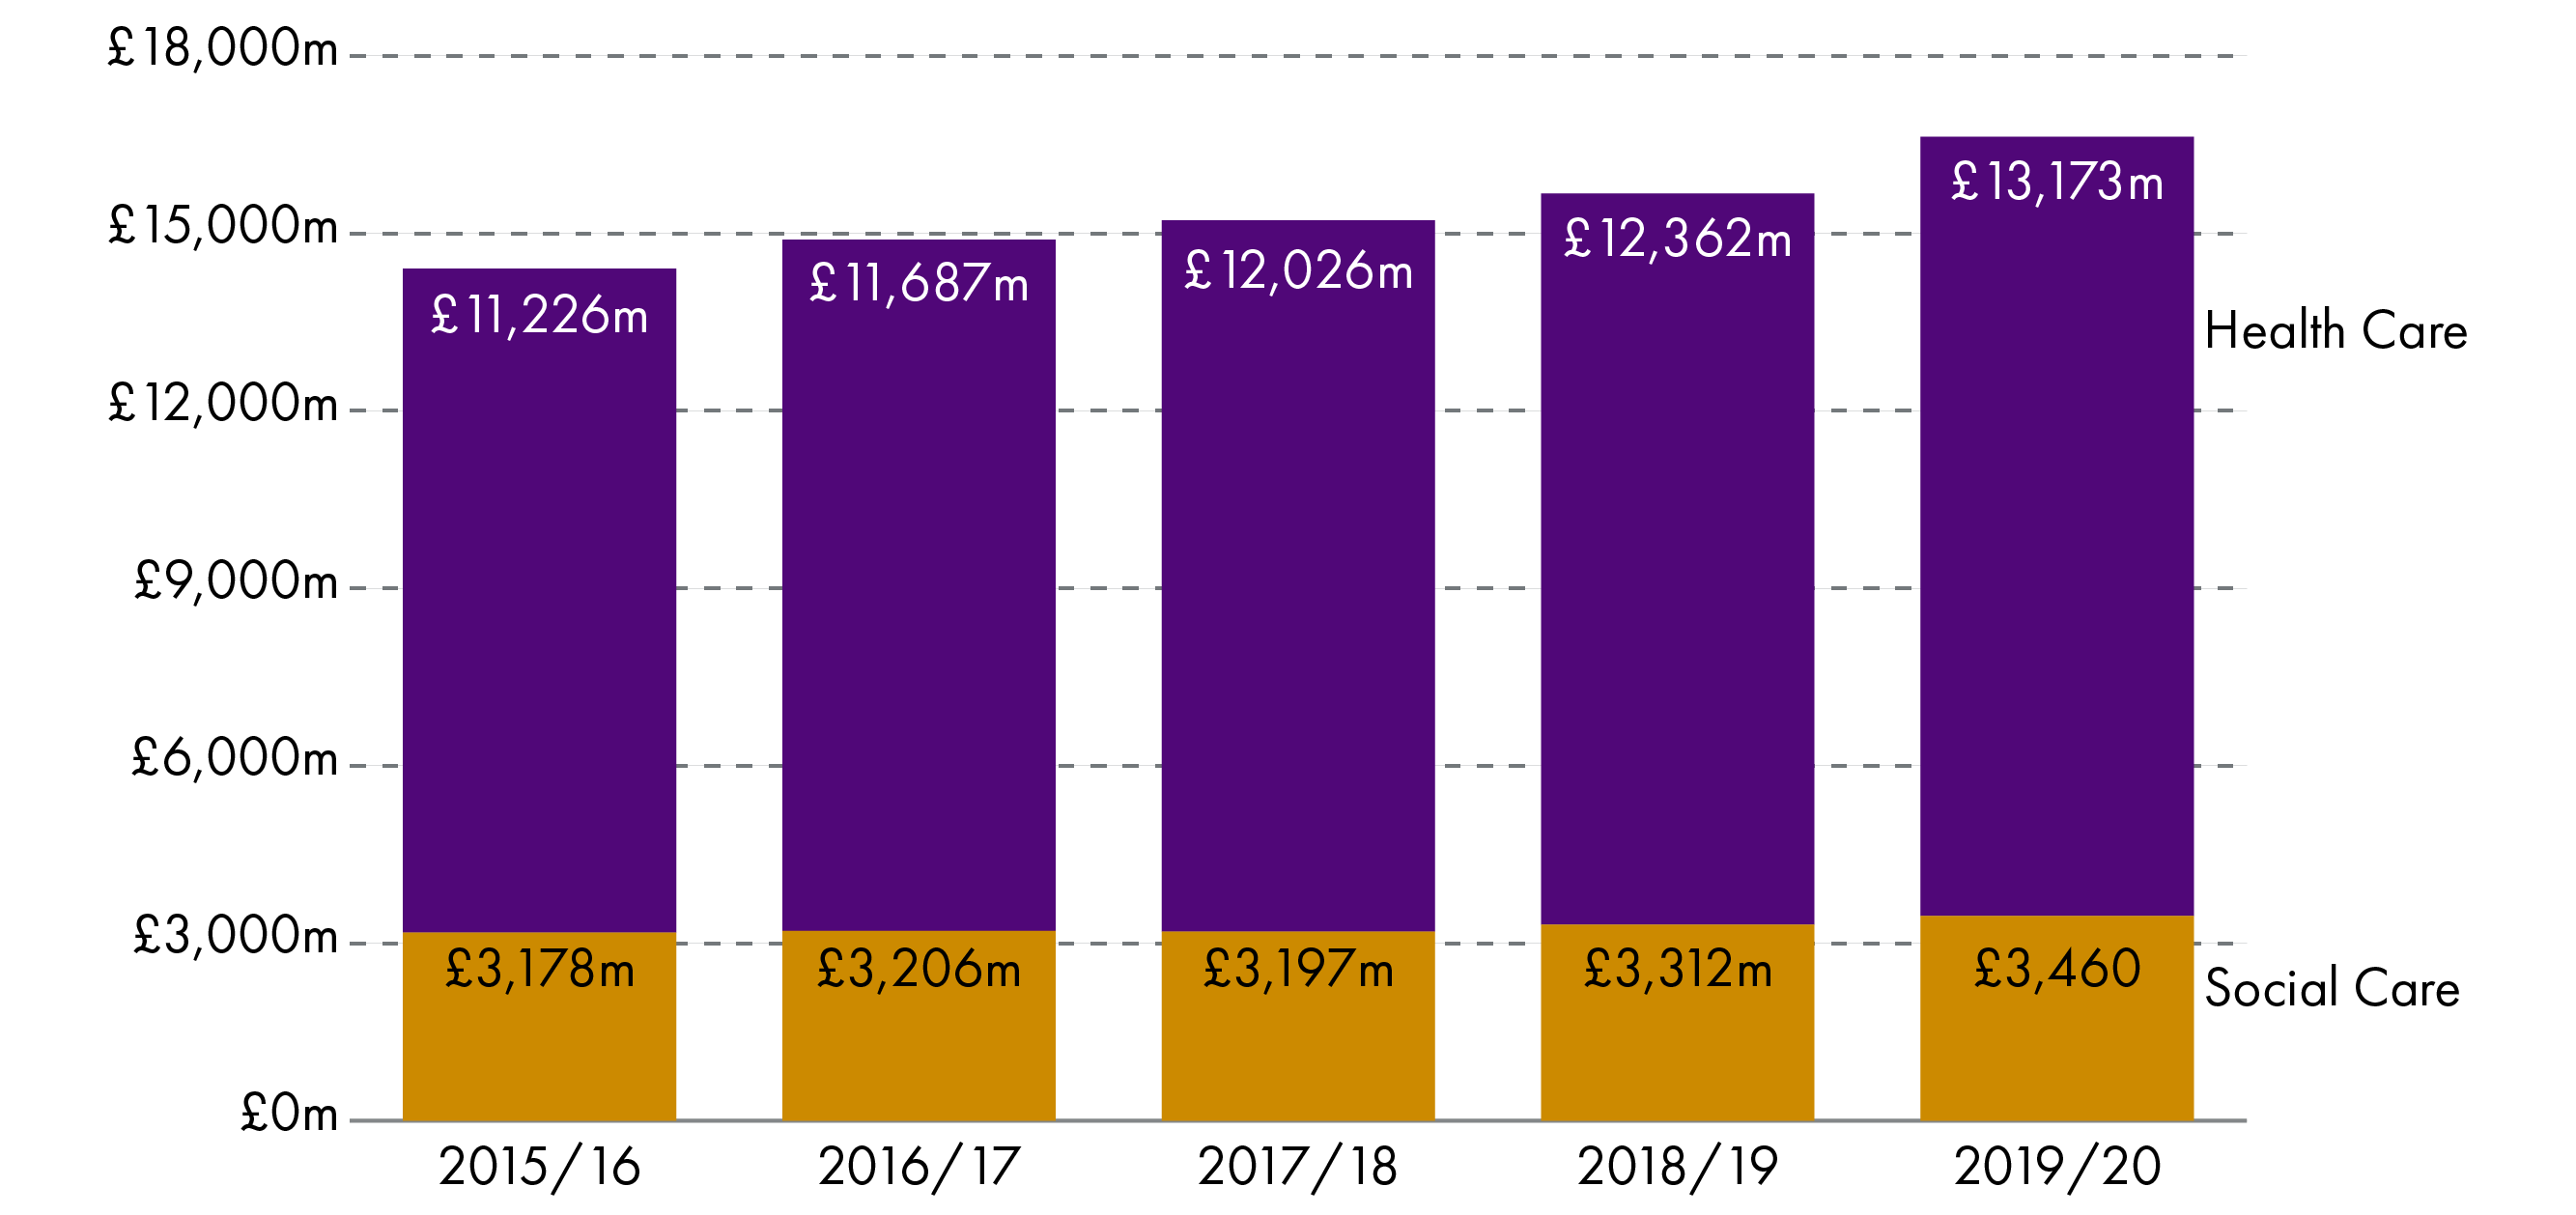 This chart shows the relative proportions of spending on health care and social care, showing that health spending has been steadily rising whereas spending on social care has remained static.